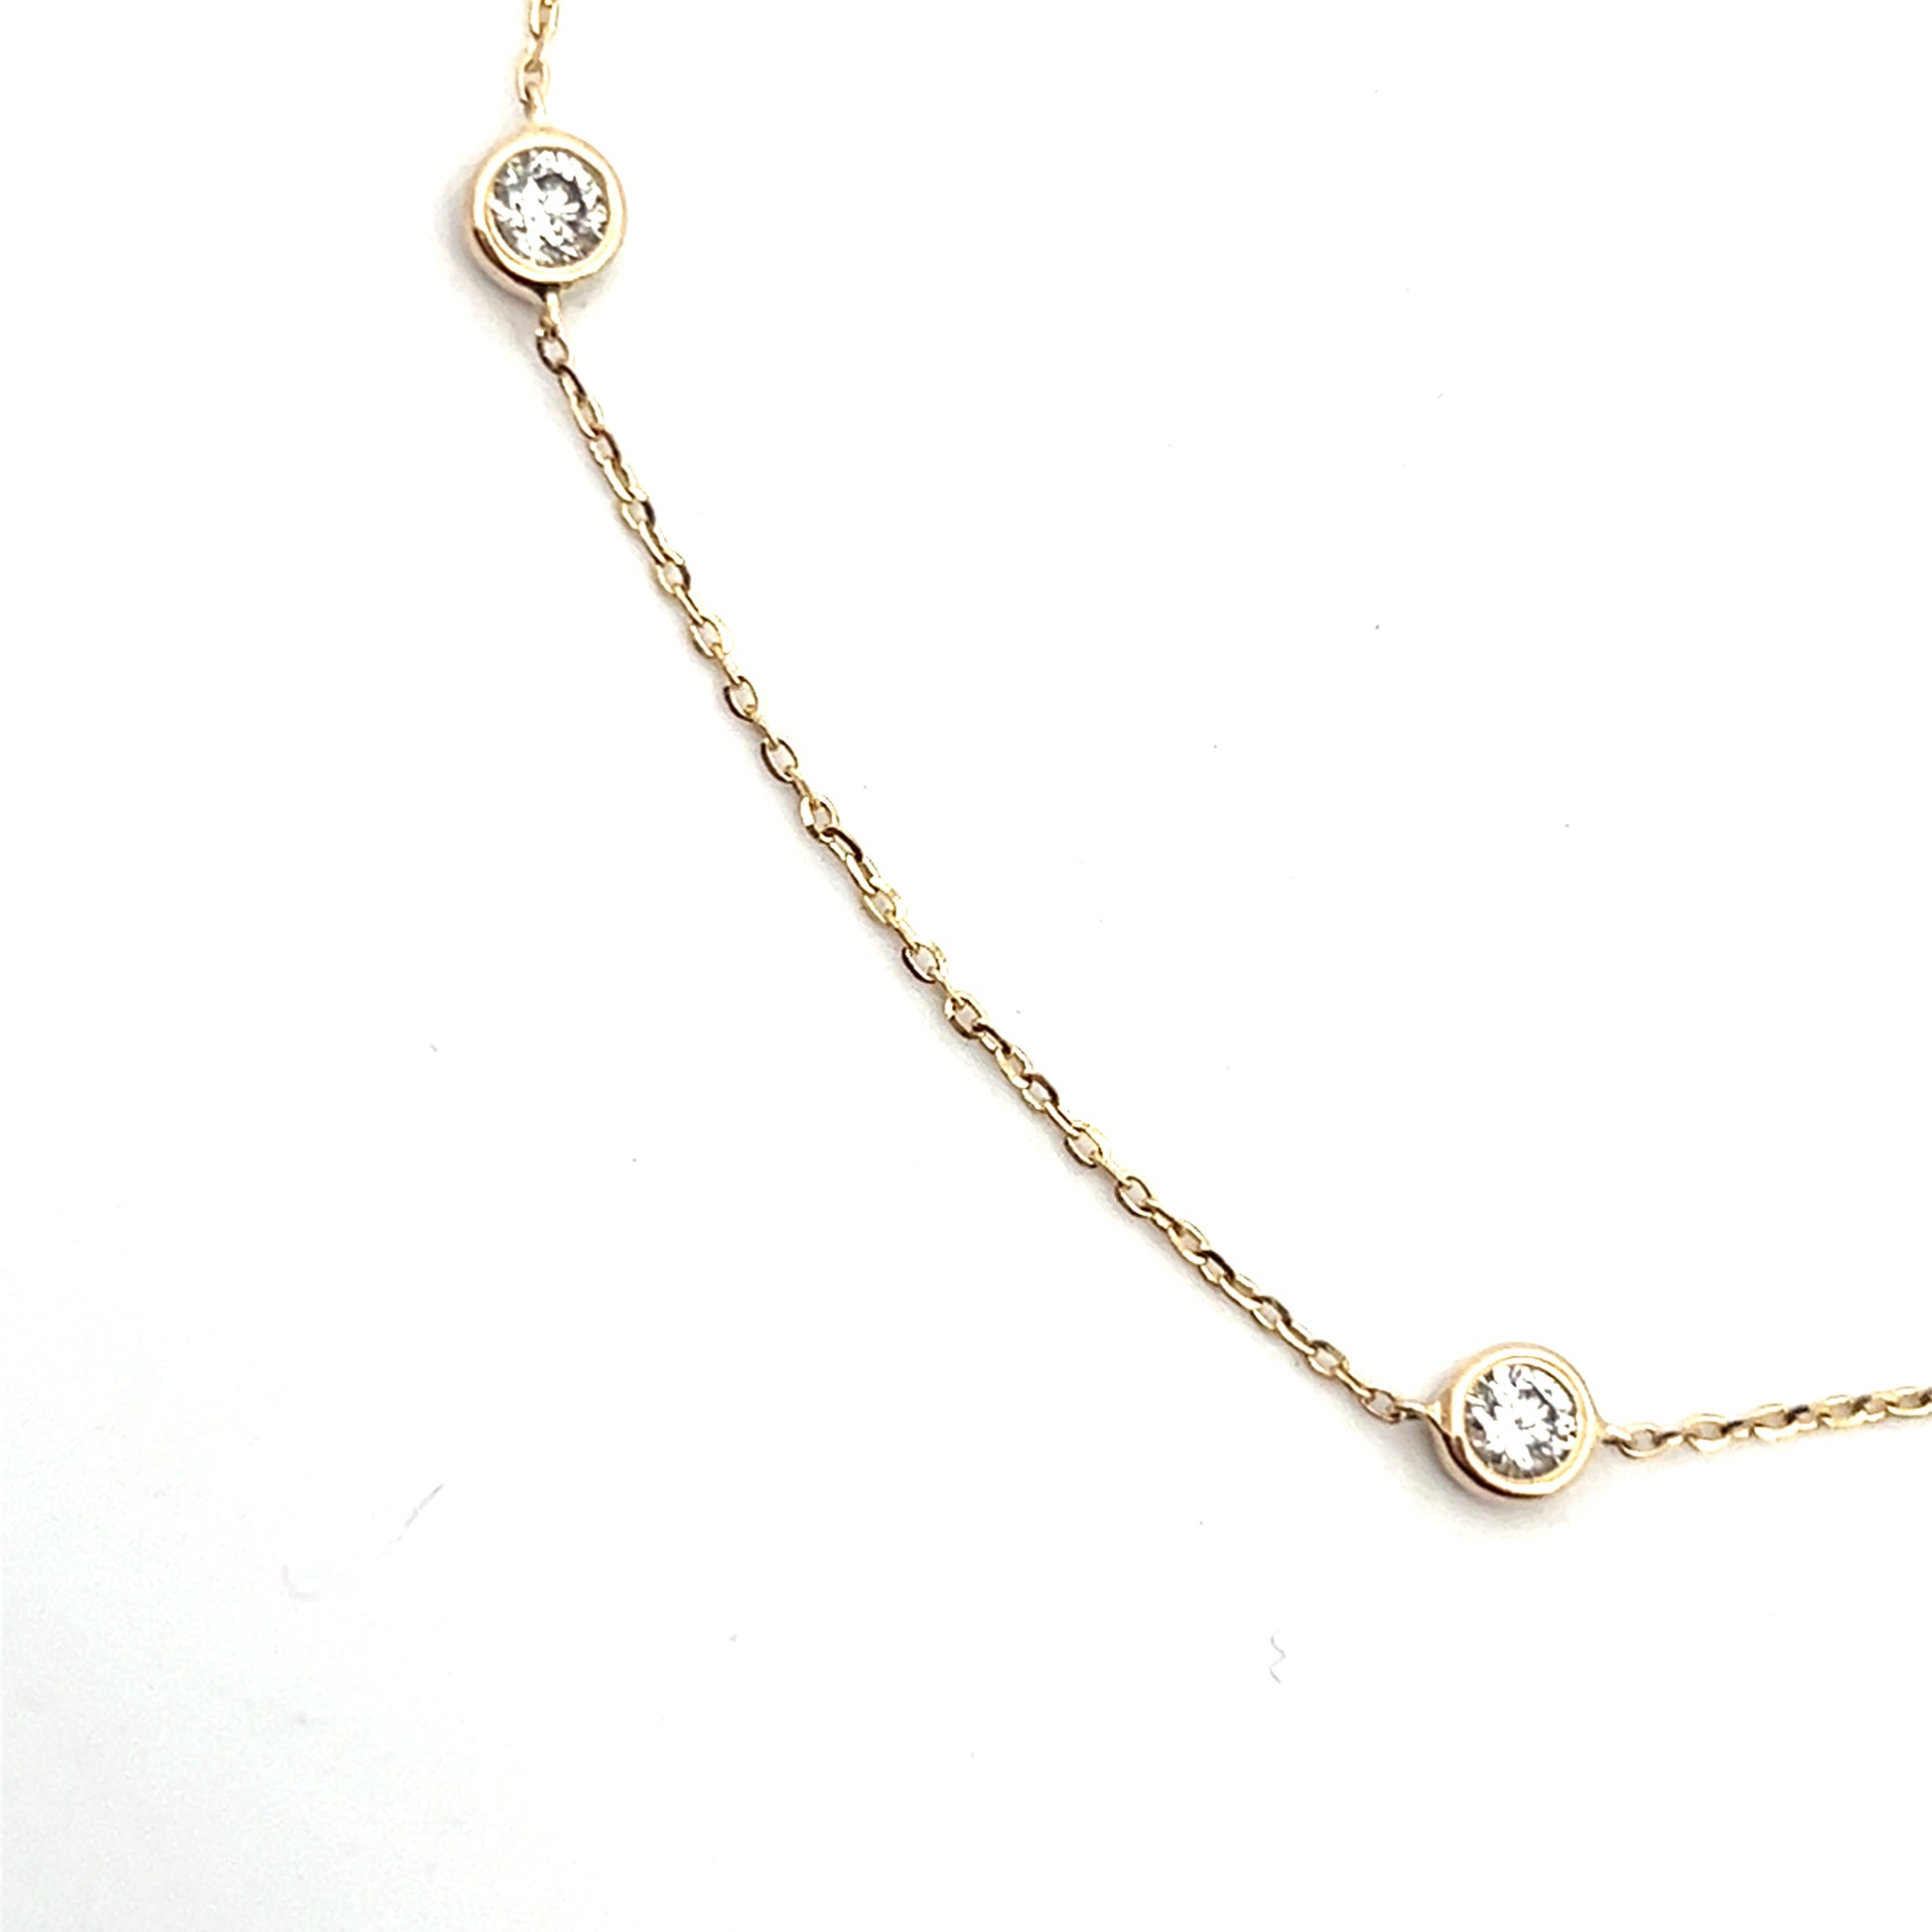 1.06cttw Diamonds By The Yard Necklace close up | Diamond Yard Necklace